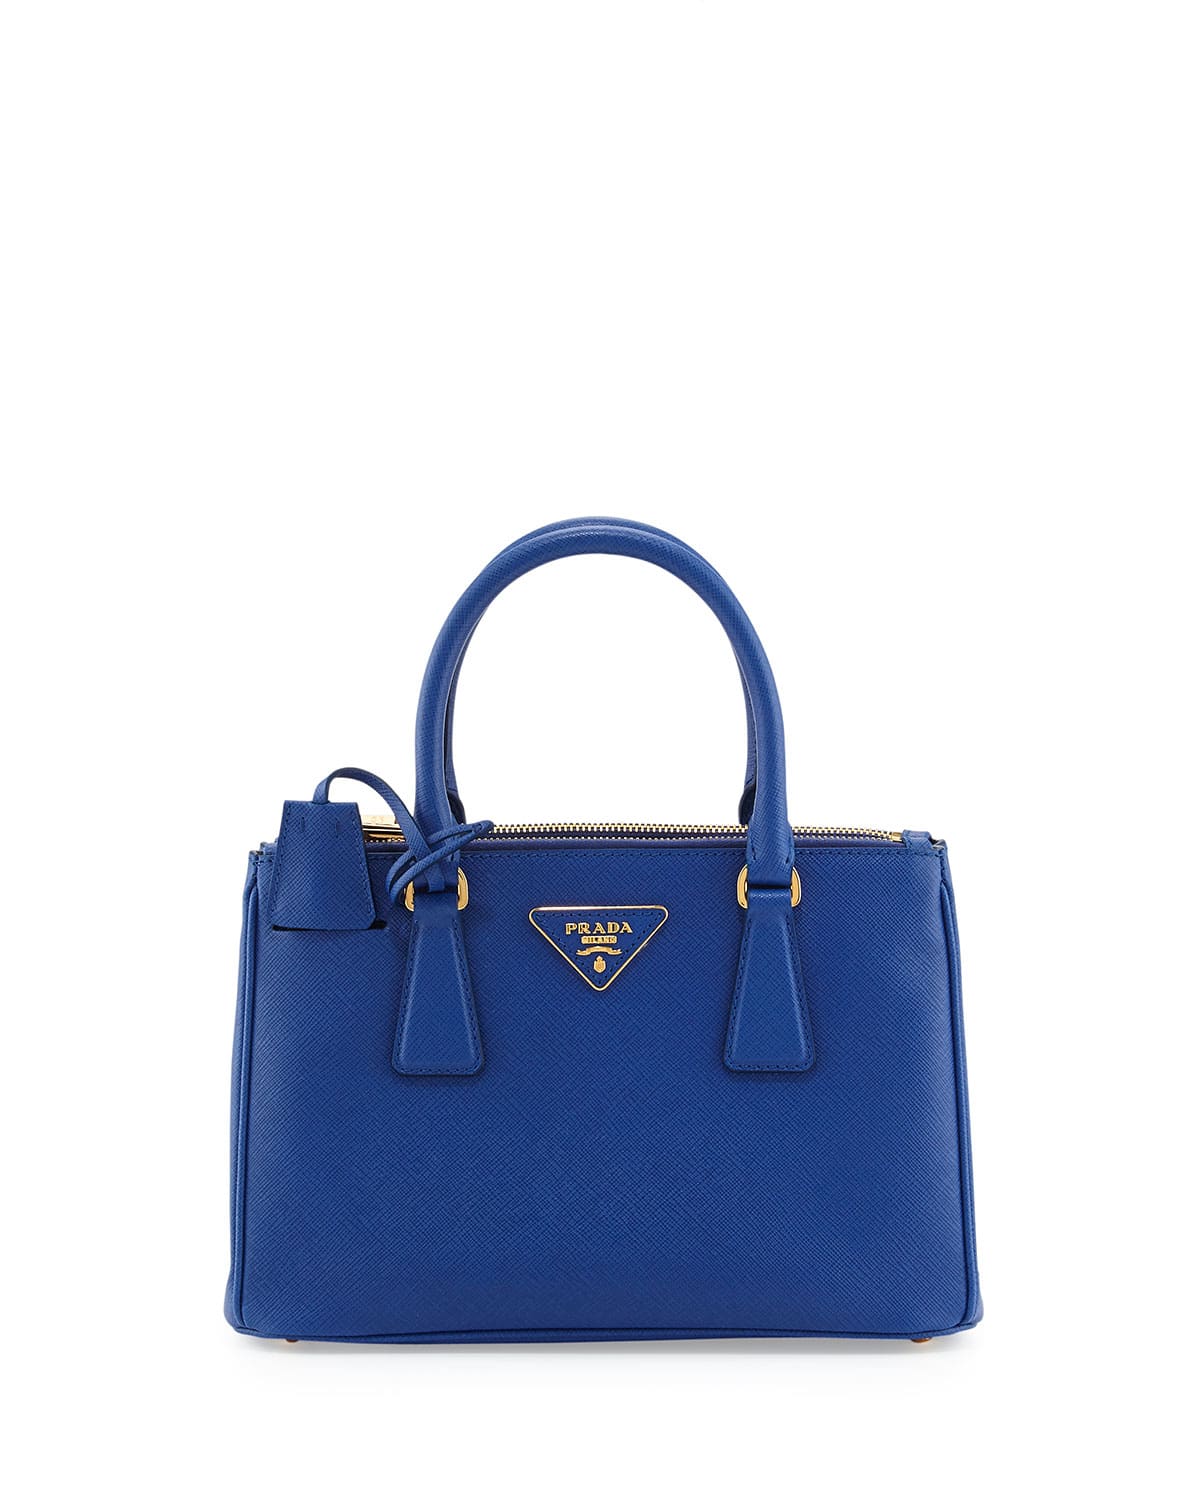 Prada Pre-Fall 2014 Bag Collection featuring new Double Totes in ...  